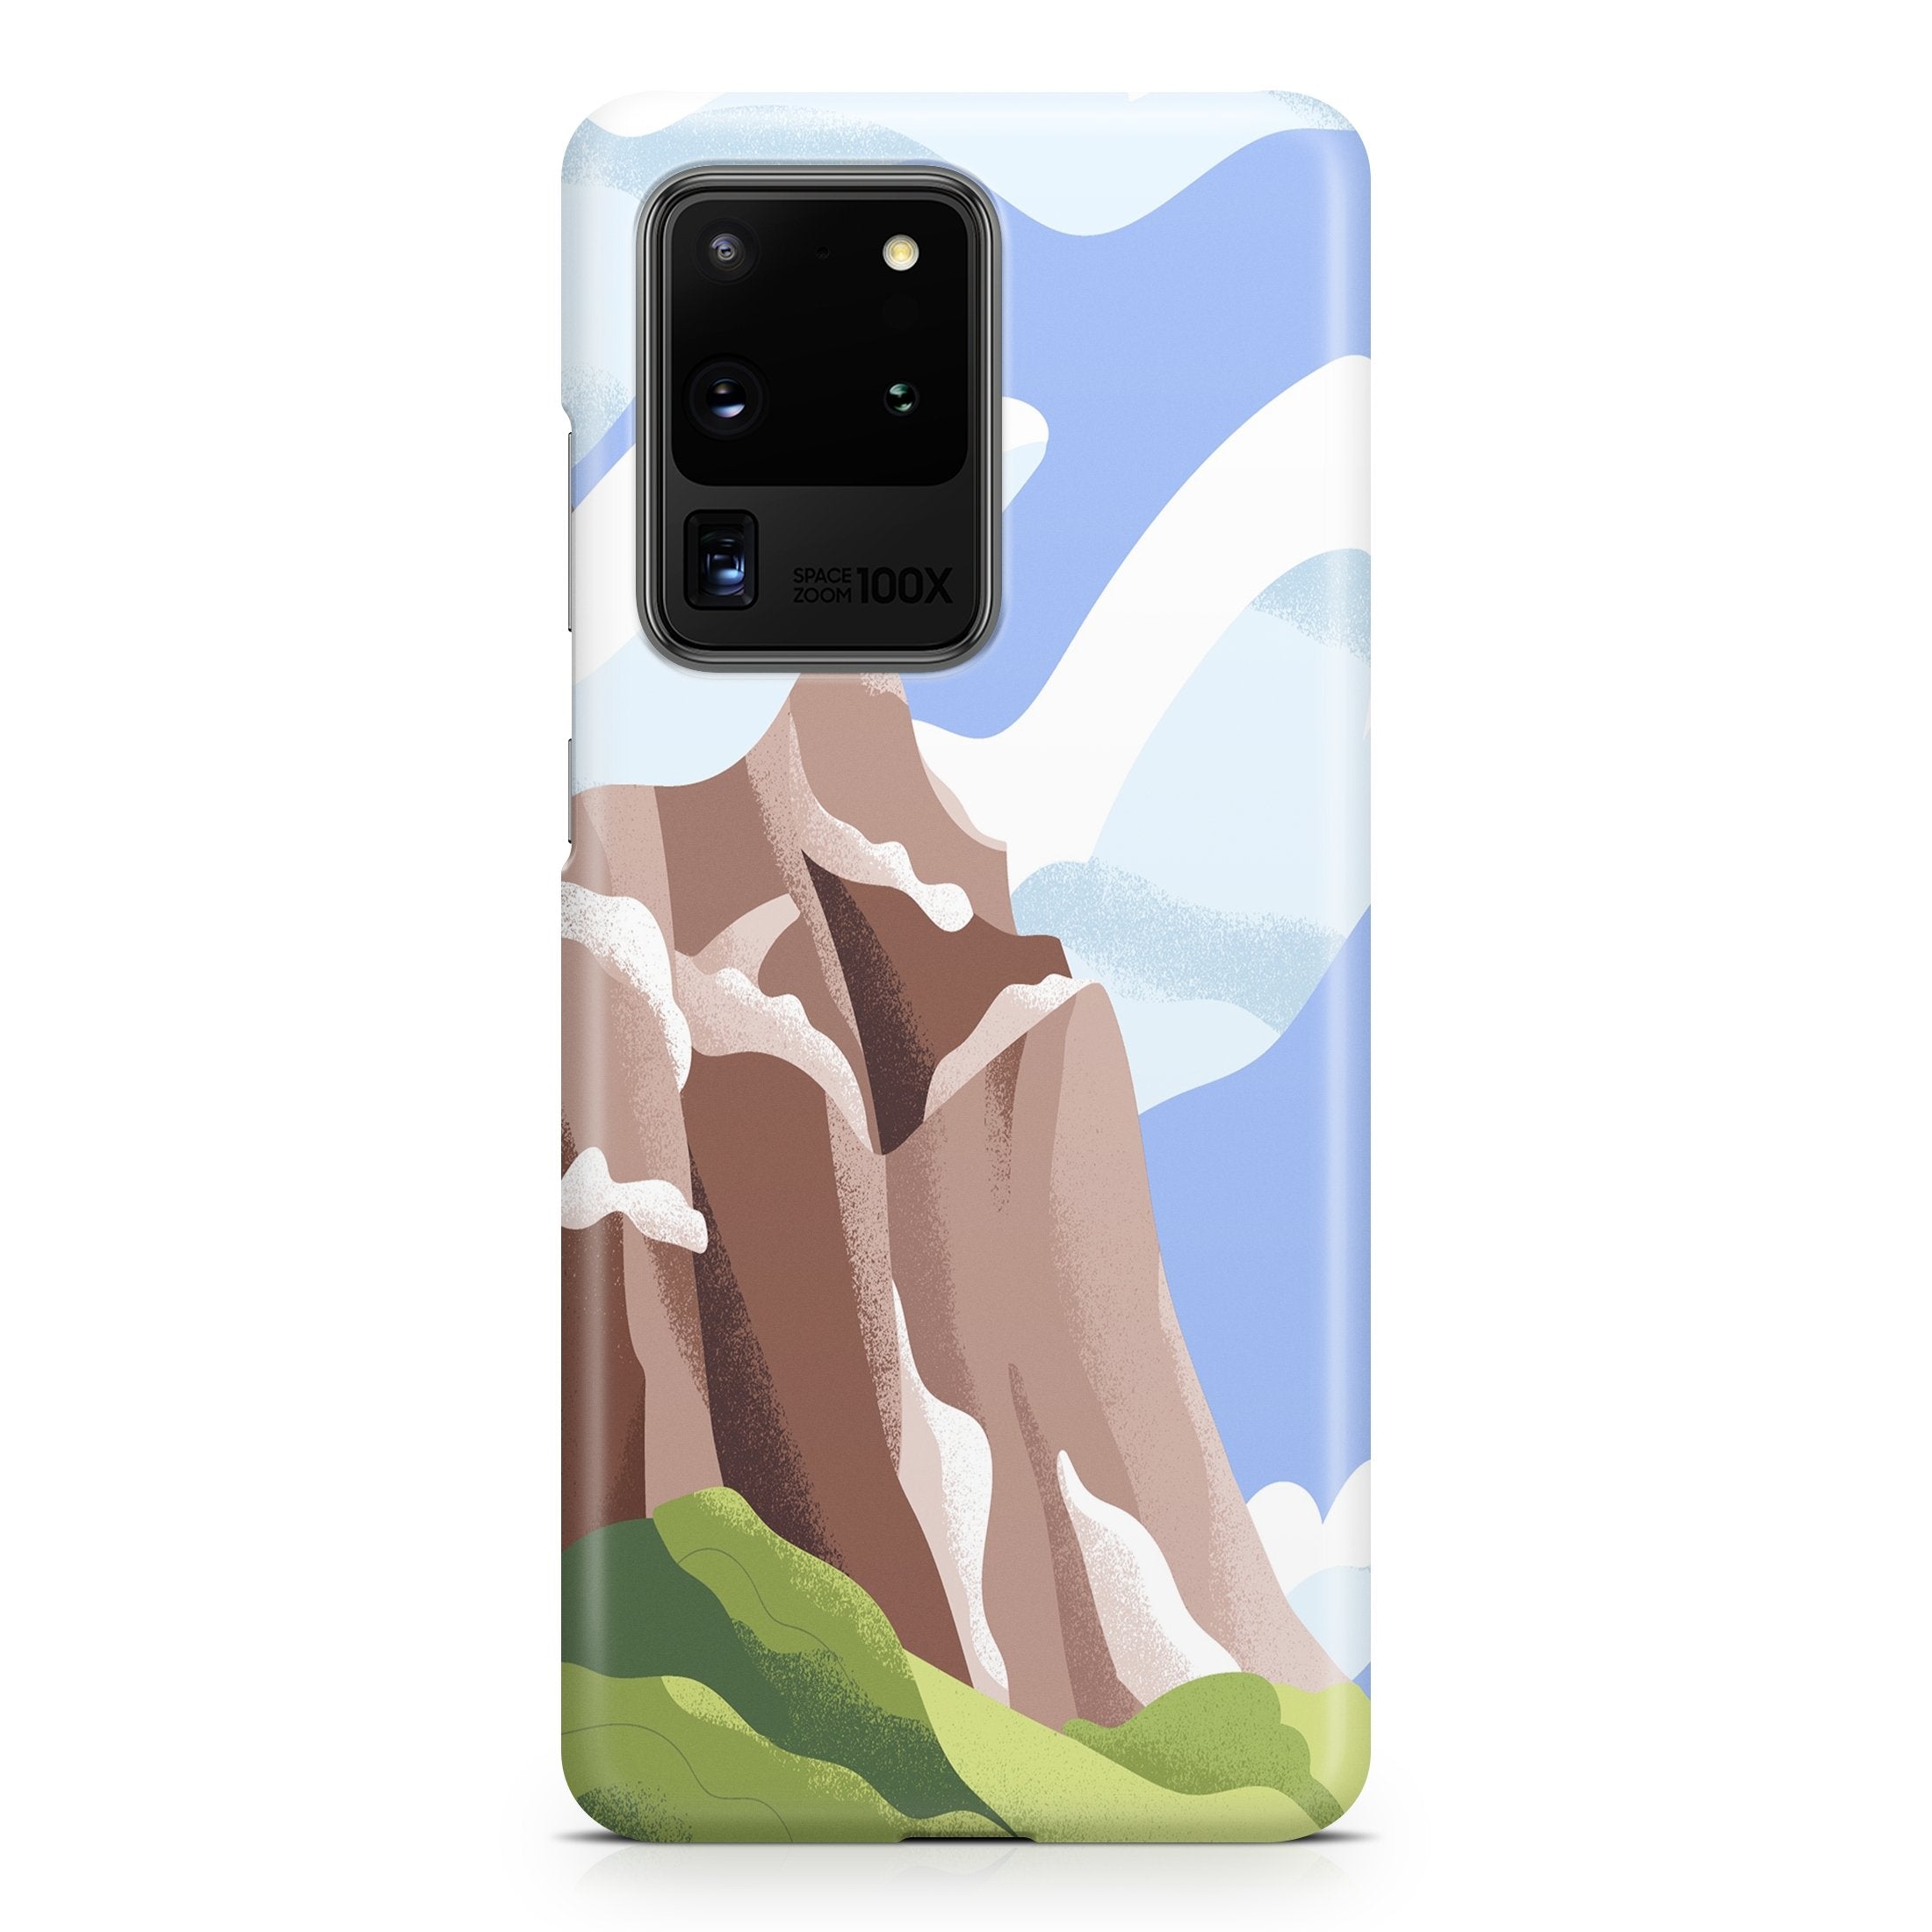 Watercolor Mountain - Samsung phone case designs by CaseSwagger